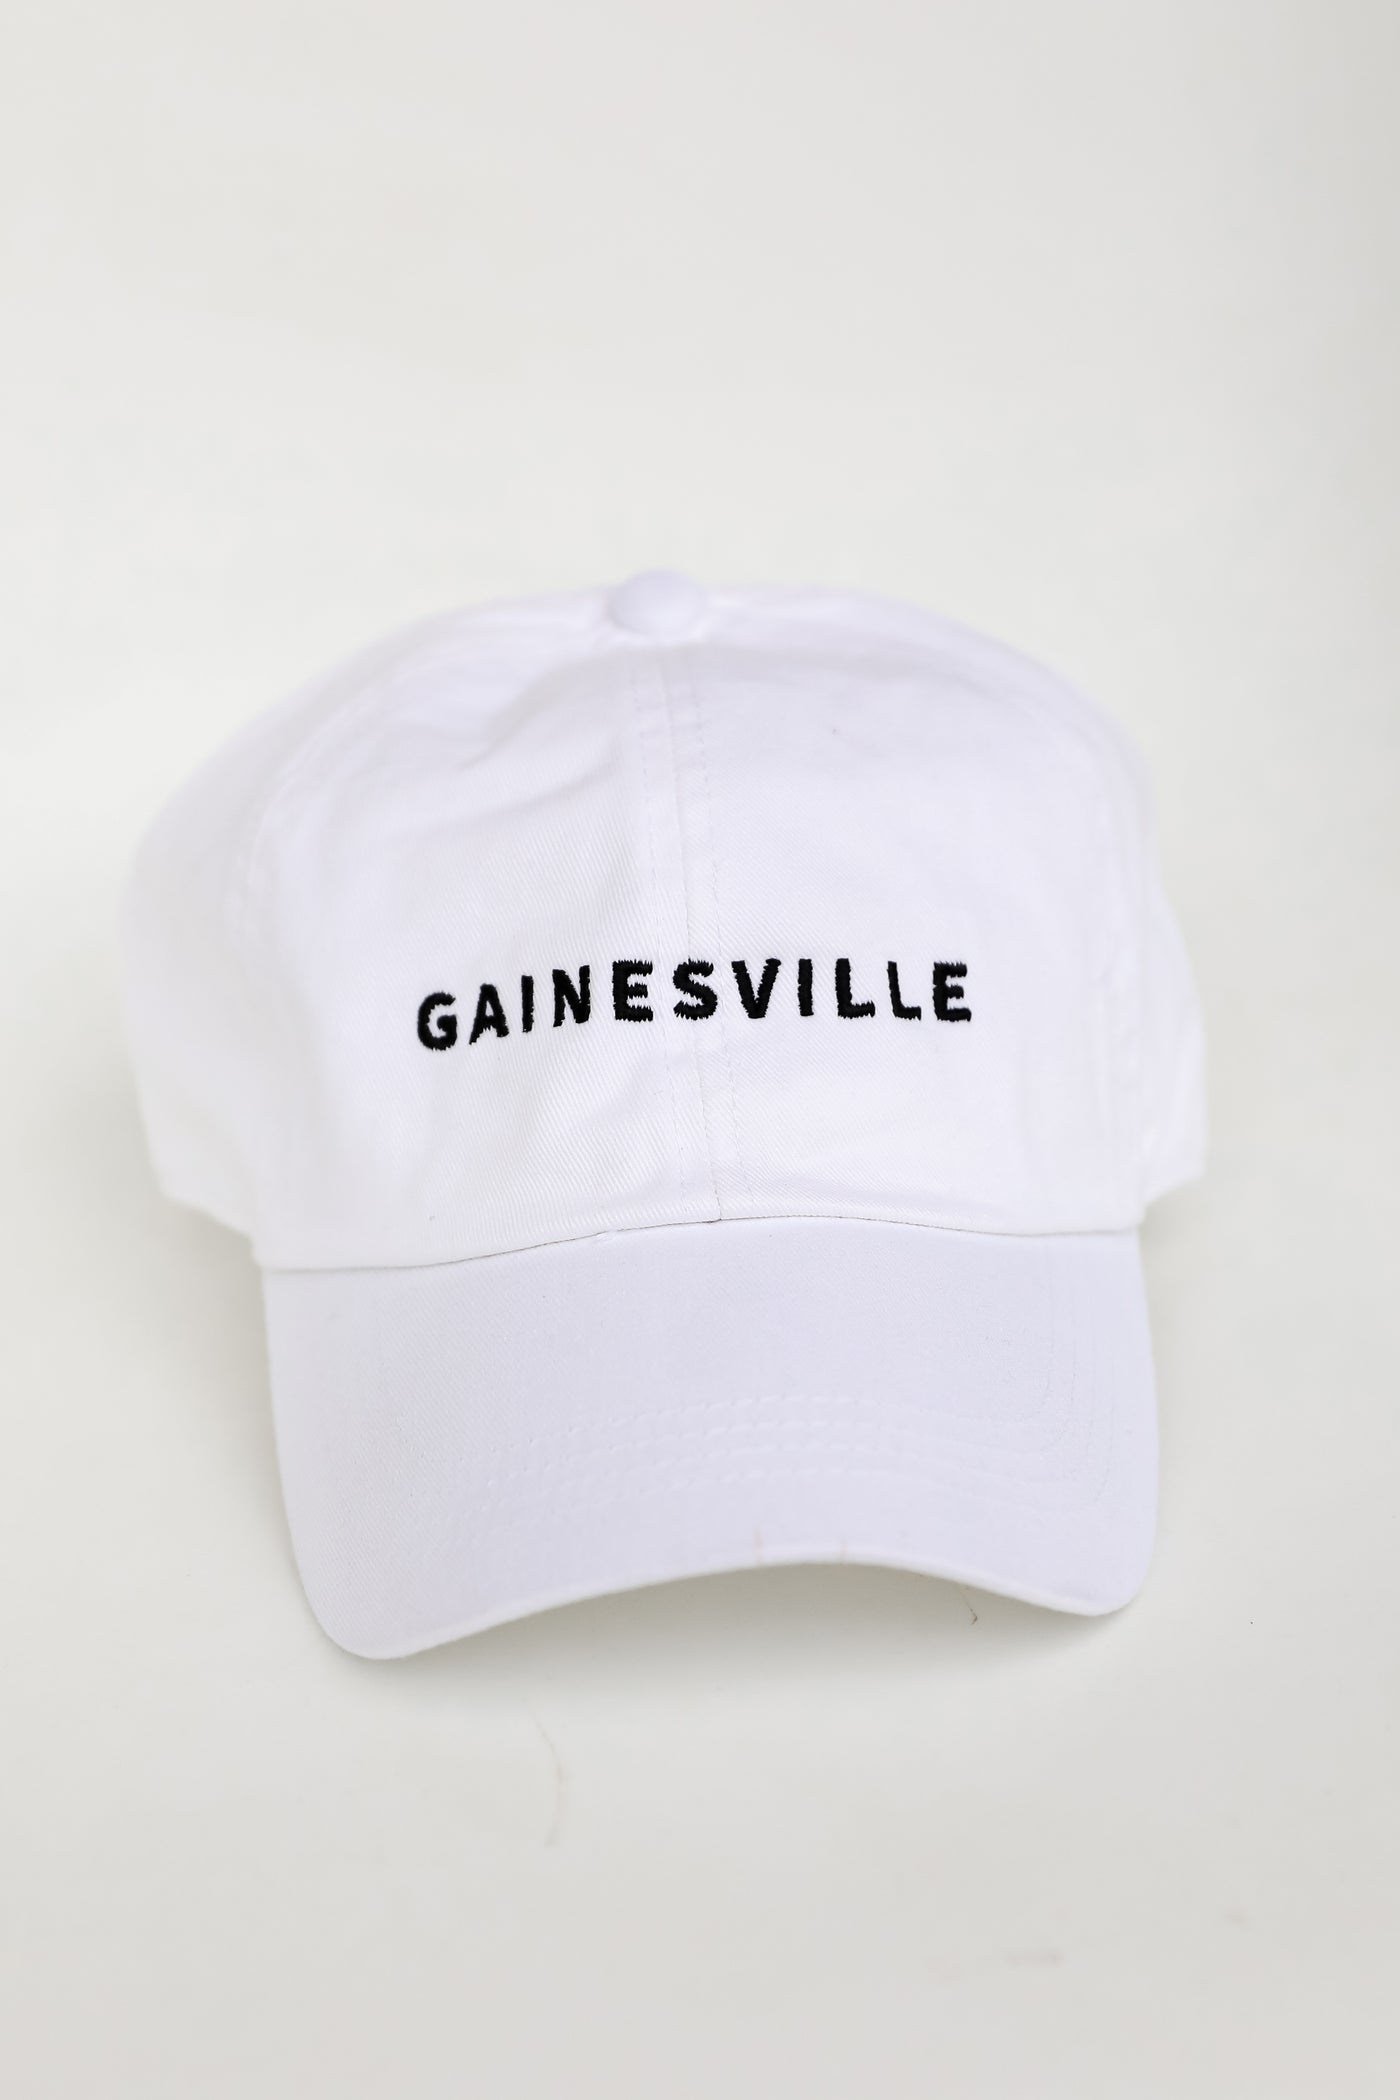 Gainesville Embroidered Hat flat lay